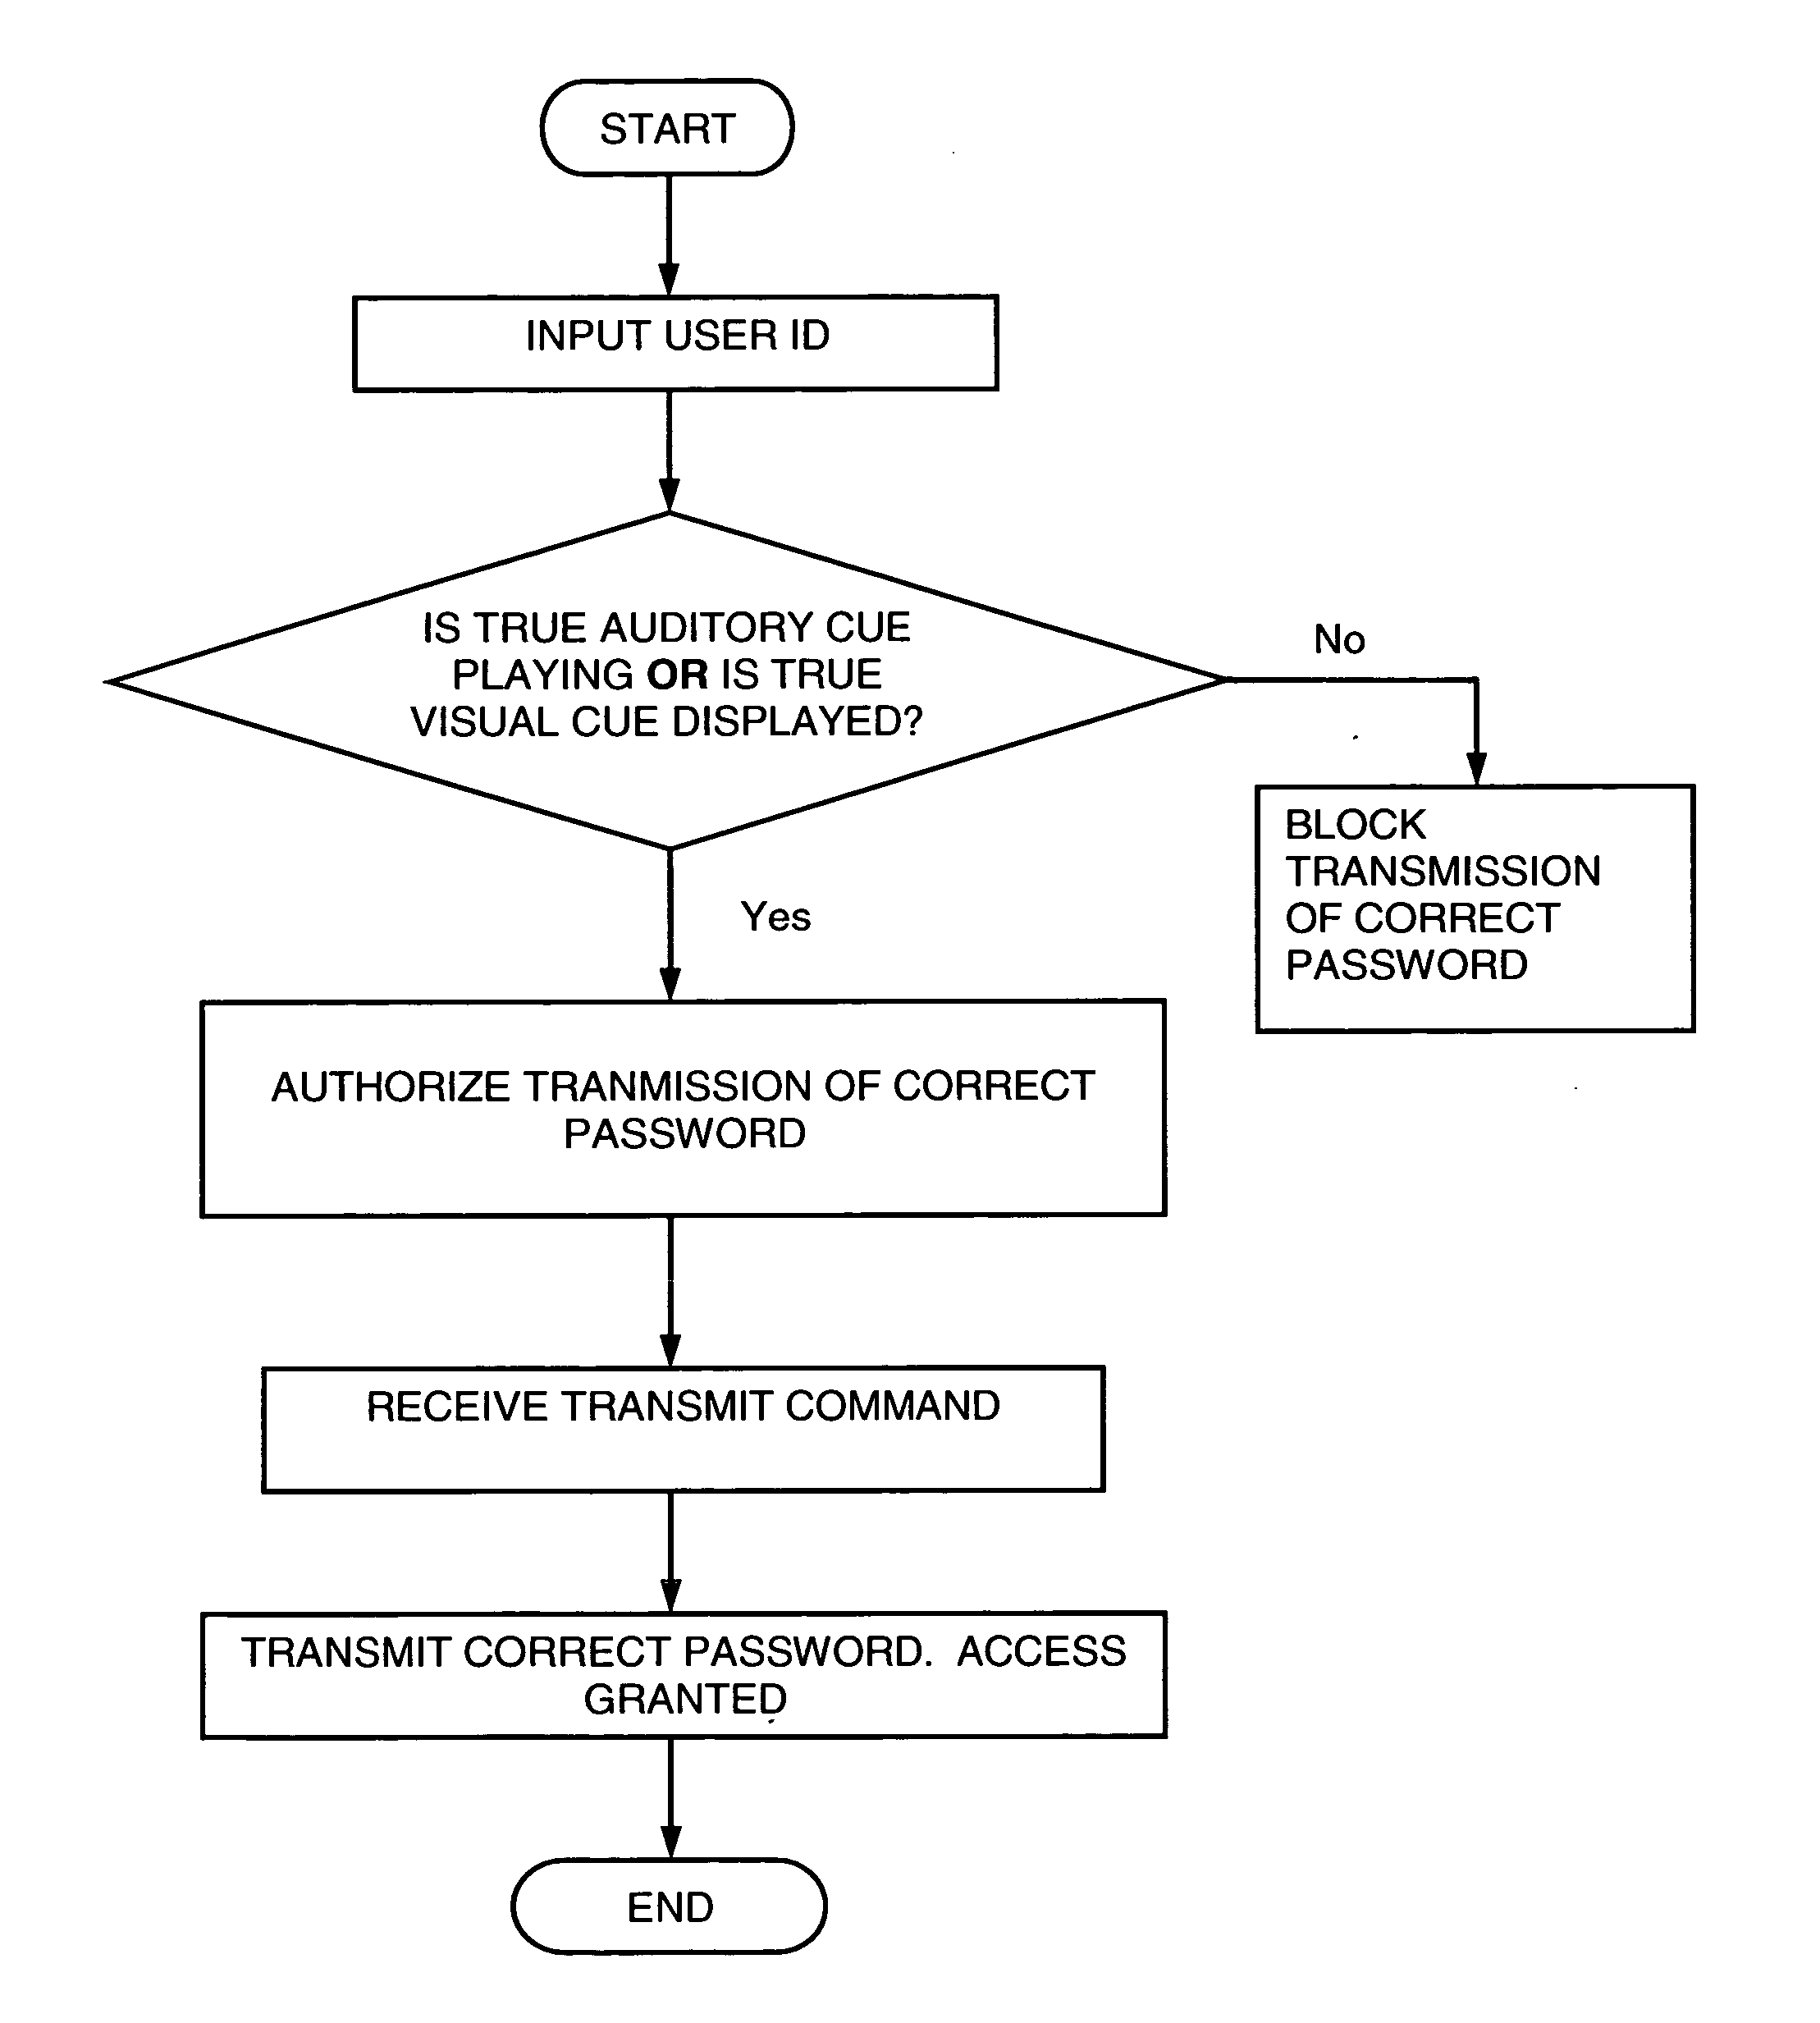 System and method for user authentication employing portable handheld electronic devices